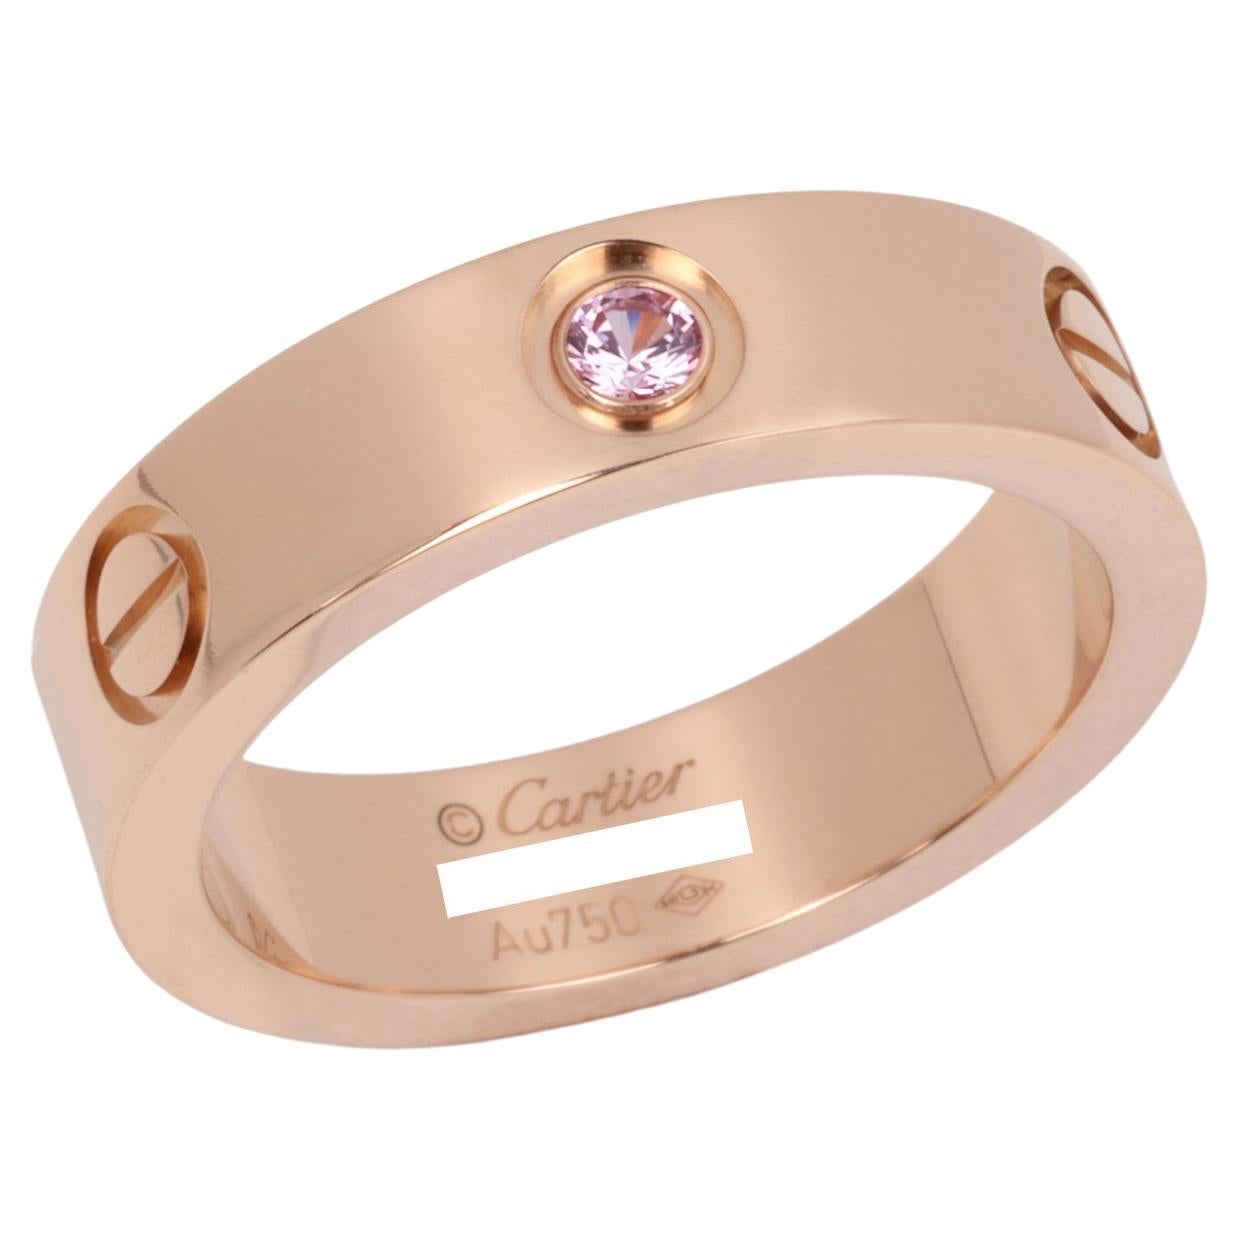 Cartier 1 Pink Sapphire 18ct Rose Gold Love Band Ring